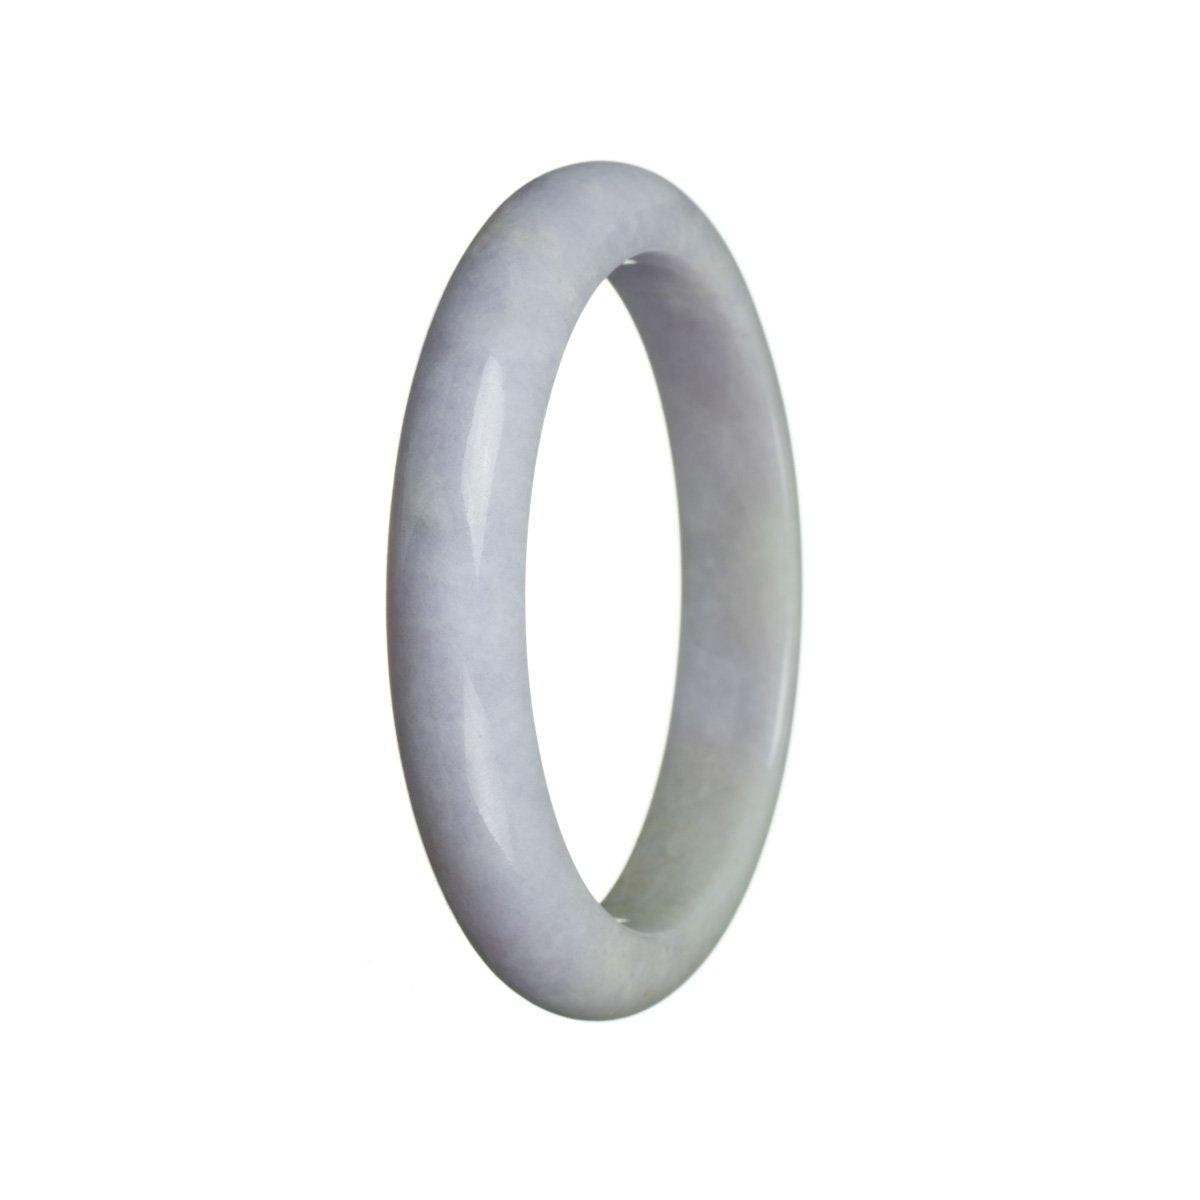 A high-quality lavender jade bangle bracelet with a semi-round shape, measuring 55mm in diameter.